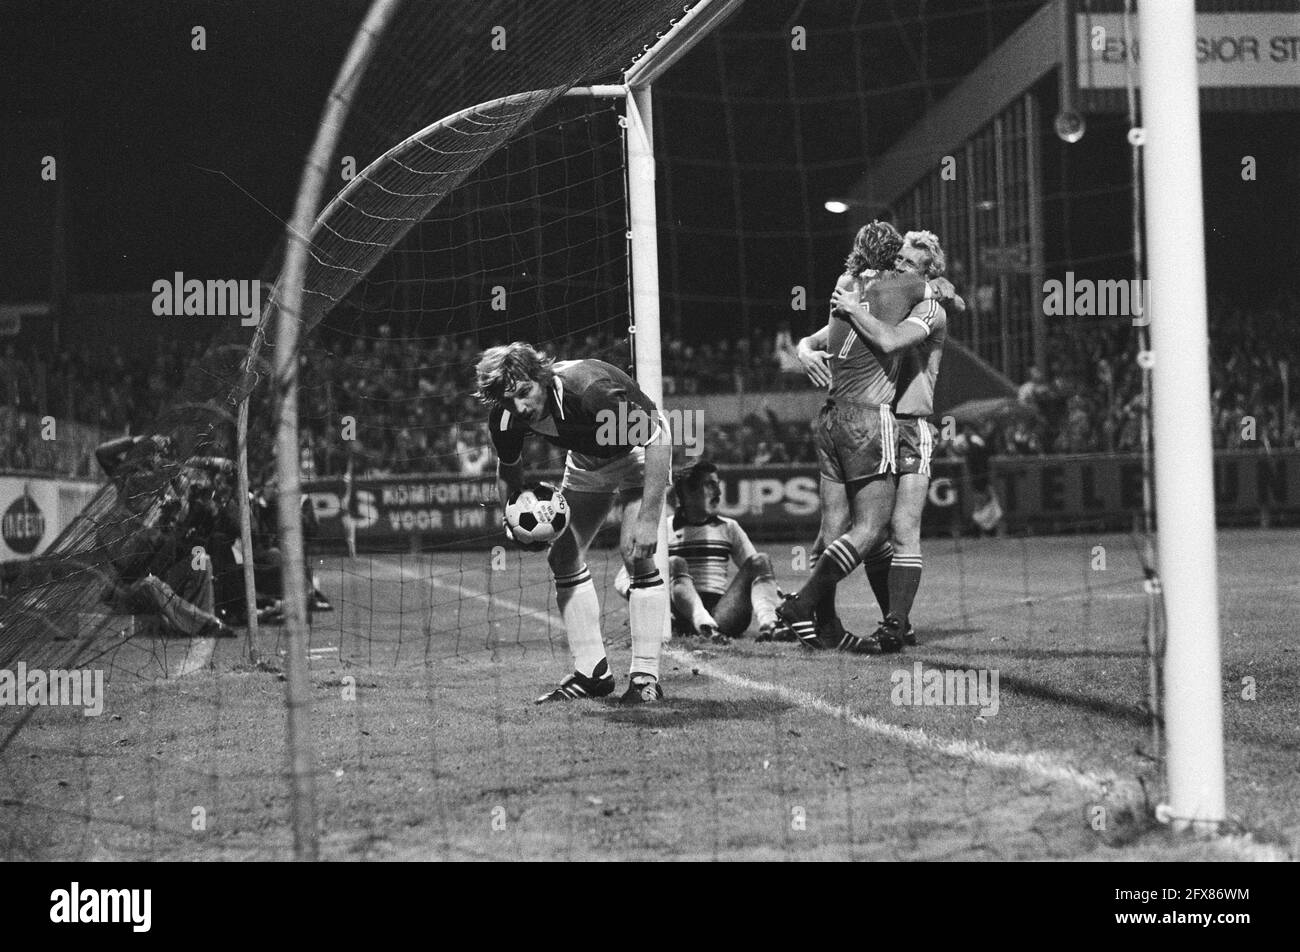 AZ67 against Red Boys (Luxembourg) Uefa-cup, Nijgaard (7)has scored 3-0 embraced by Kist,(seated) and Scholts retrieves ball from goal, 14 September 1977, sports, soccer, The Netherlands, 20th century press agency photo, news to remember, documentary, historic photography 1945-1990, visual stories, human history of the Twentieth Century, capturing moments in time Stock Photo